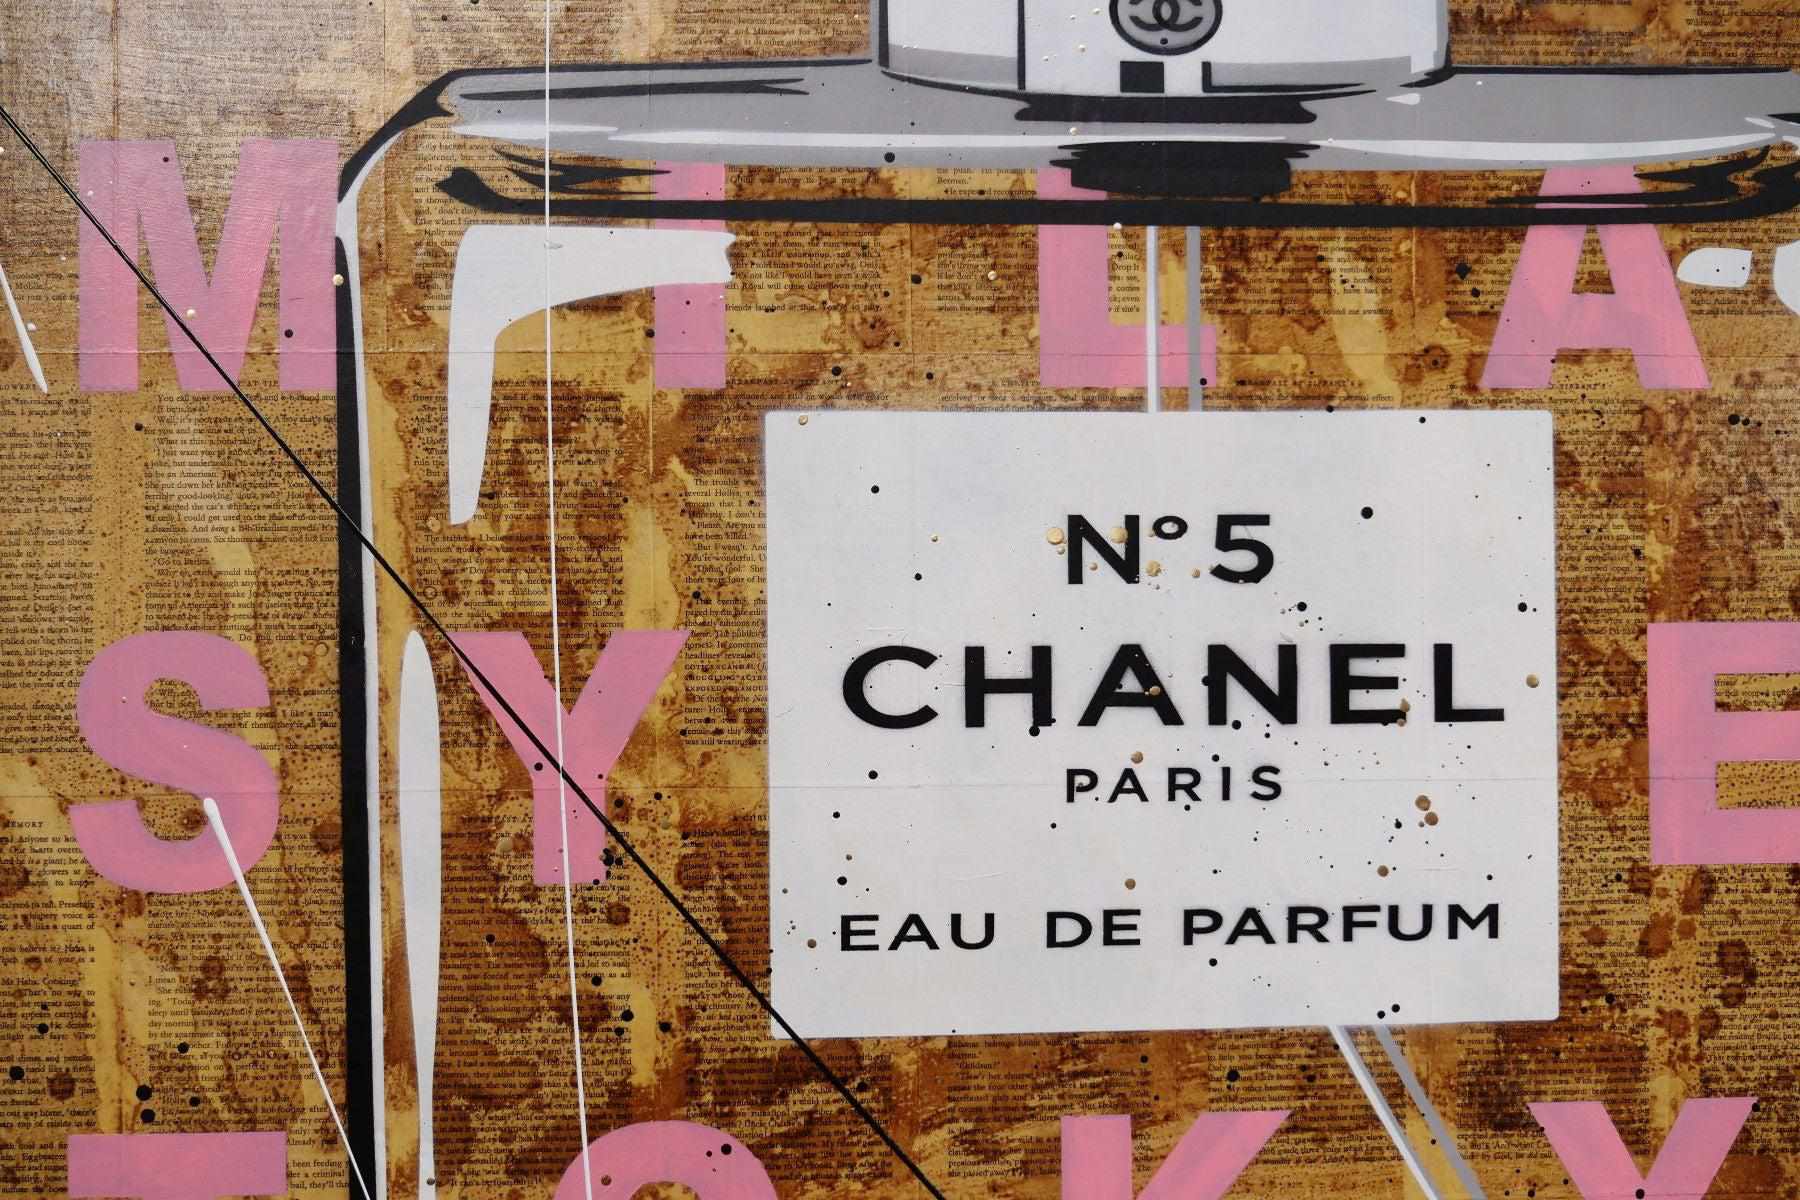 Chanel Pink 120cm x 100cm Pink Chanel Perfume Bottle Urban Pop Book Club Painting (SOLD)